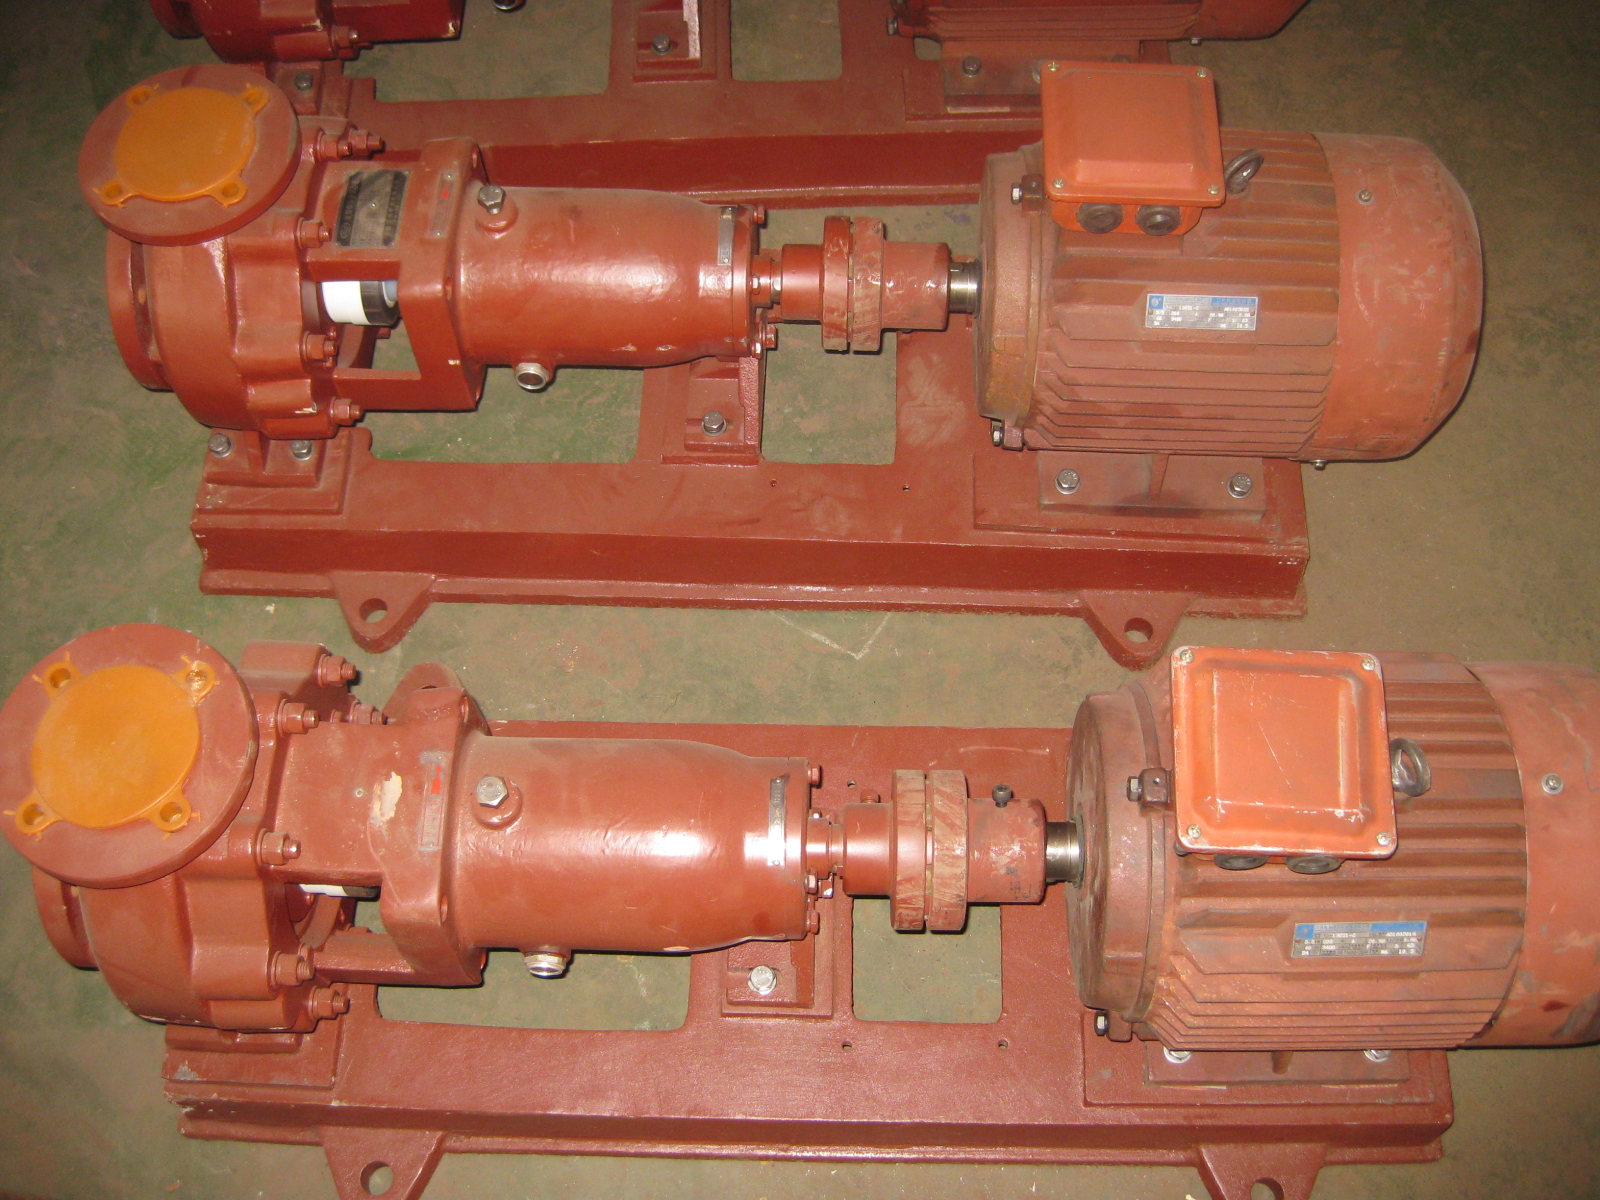 IH Stainless Steel Centrifugal Pump